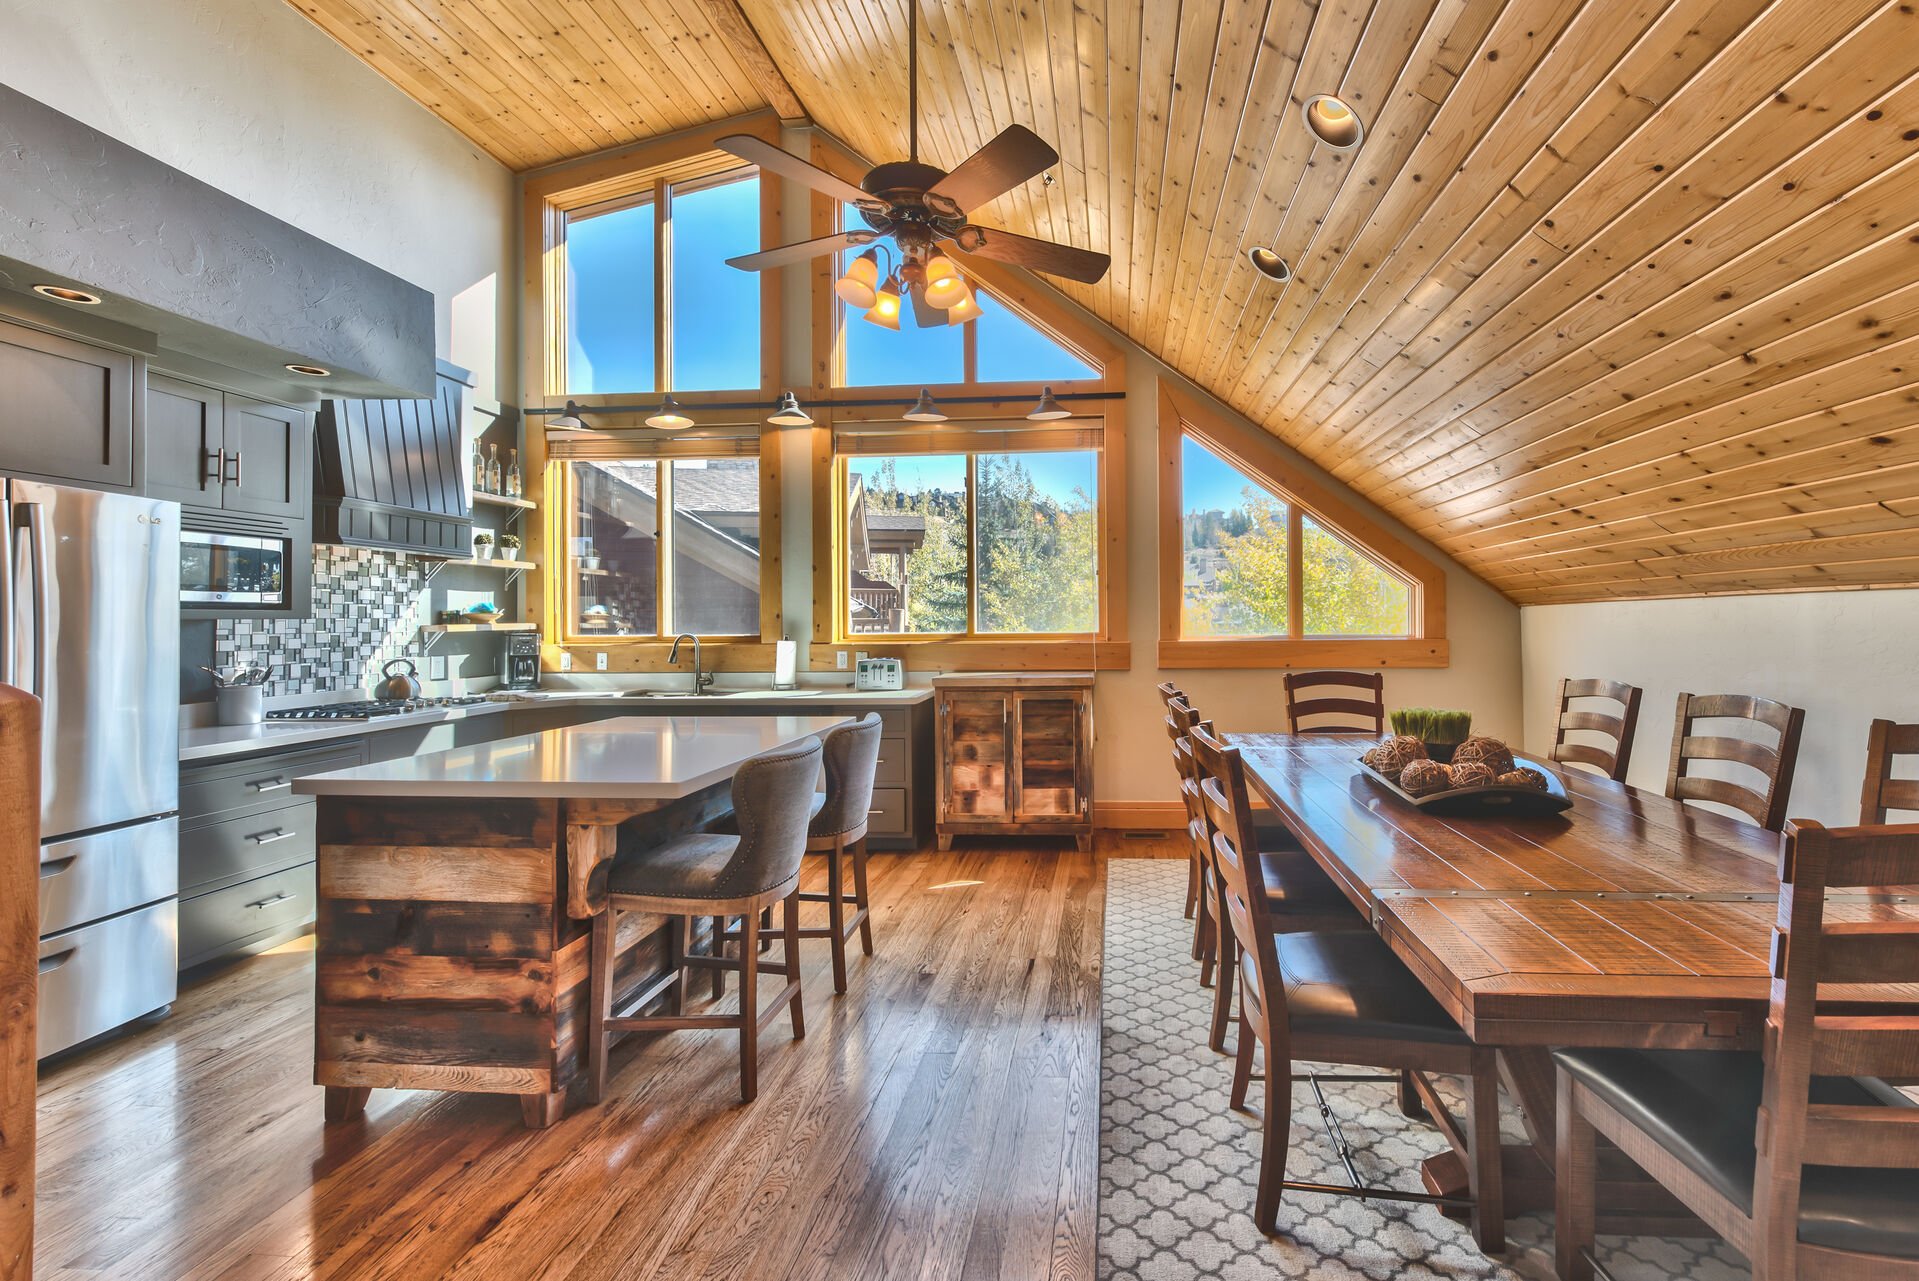 Kitchen and Dining Area with Hardwood Floors and Mountain Views